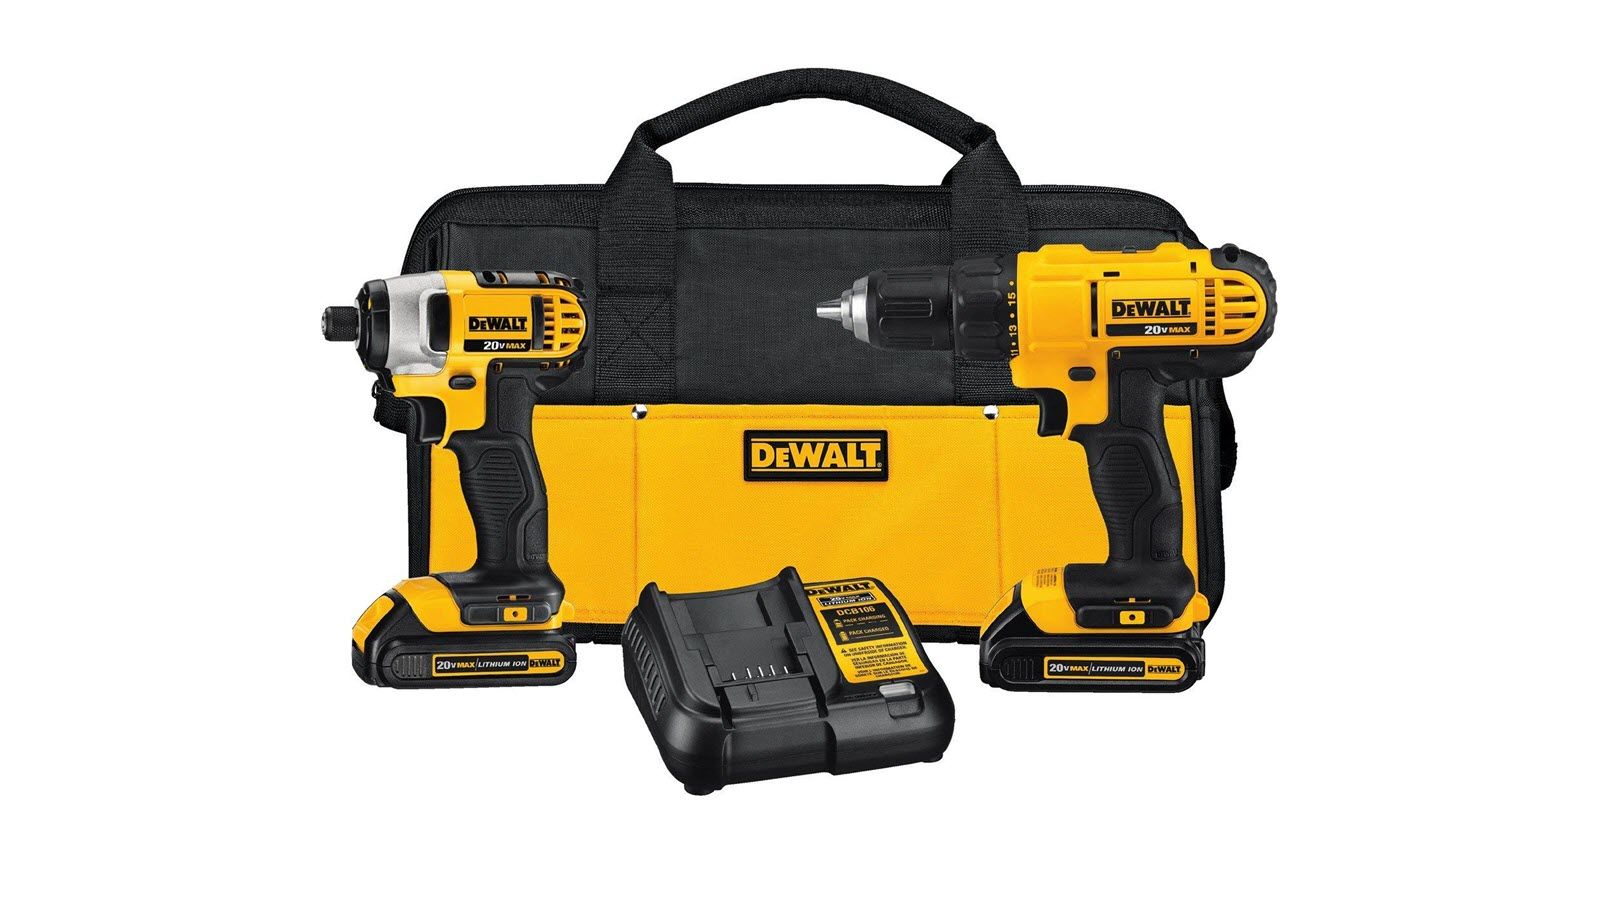 A DEWALT Impact Driver and Power drill combo kit, showing batteries, charger, and case.